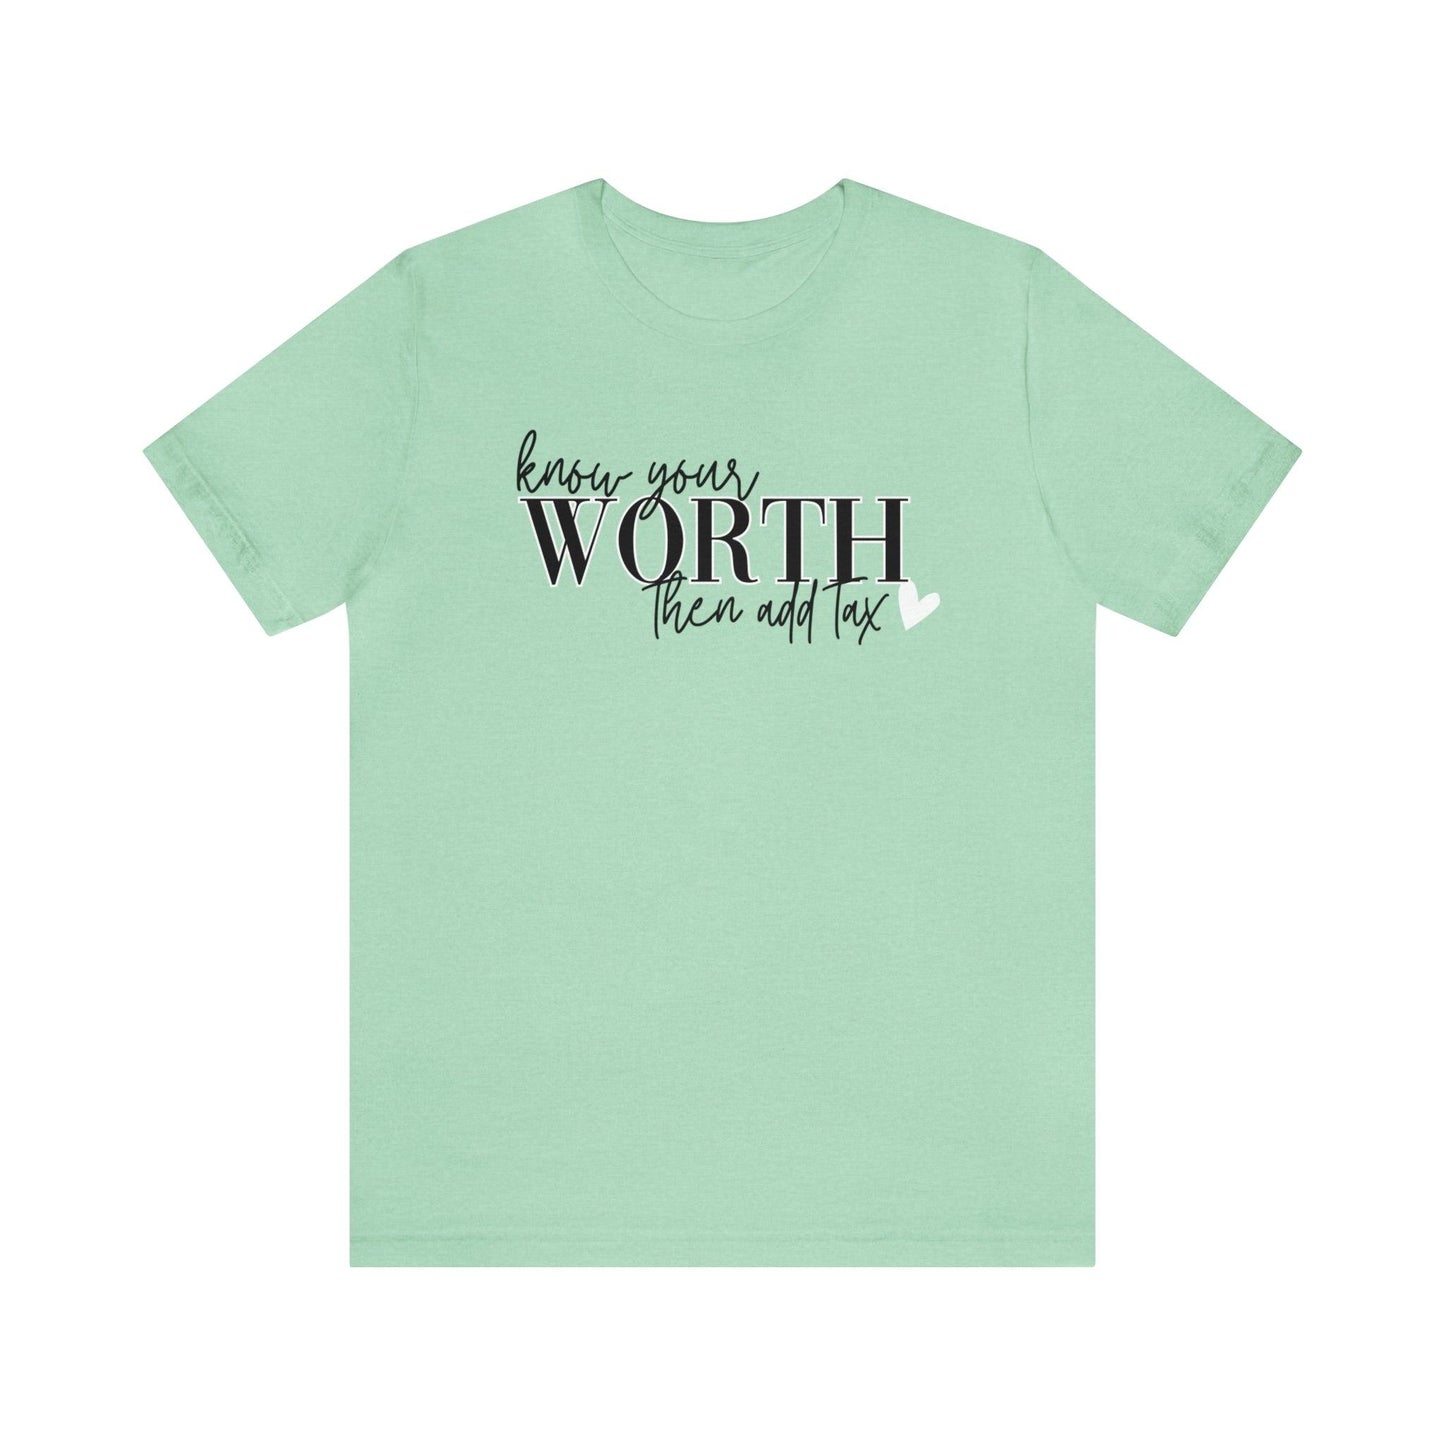 Know Your Worth Then Add Tax Shirt - BentleyBlueCo